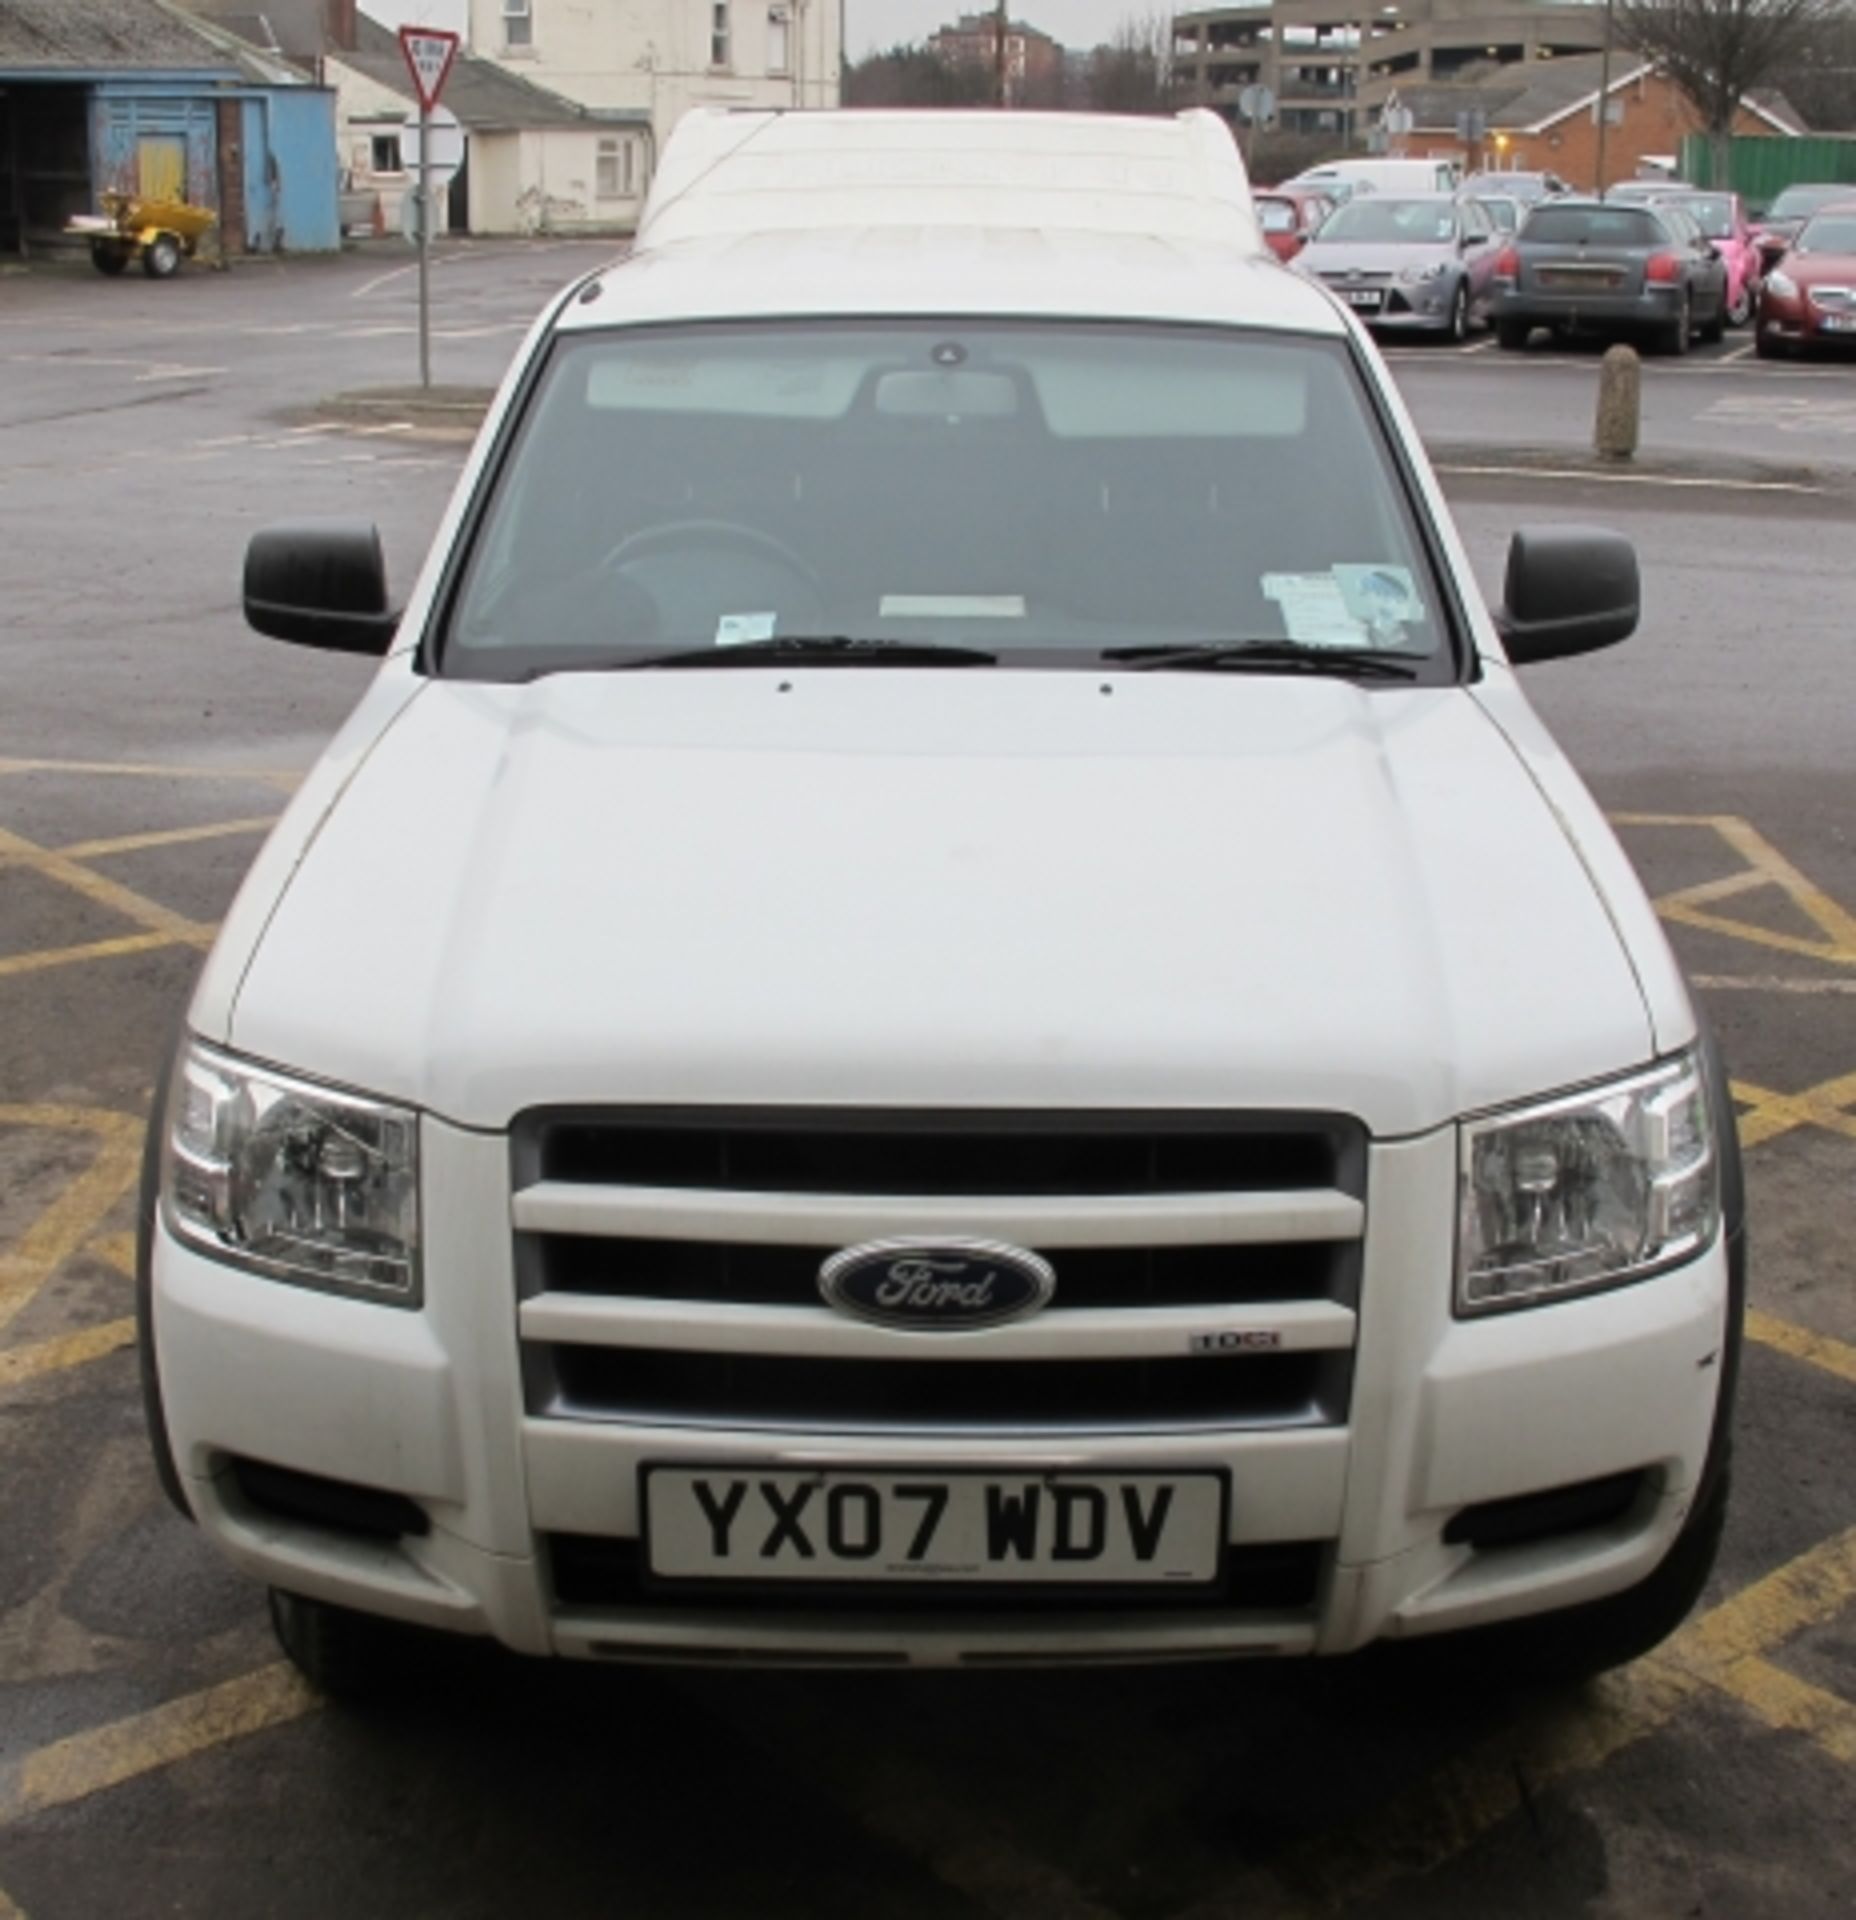 * Ford Ranger 2.5TDCI 4WD Crew Cab Pick Up with Rear Canopy & Ball Hitch, Reg YX07 WDV,